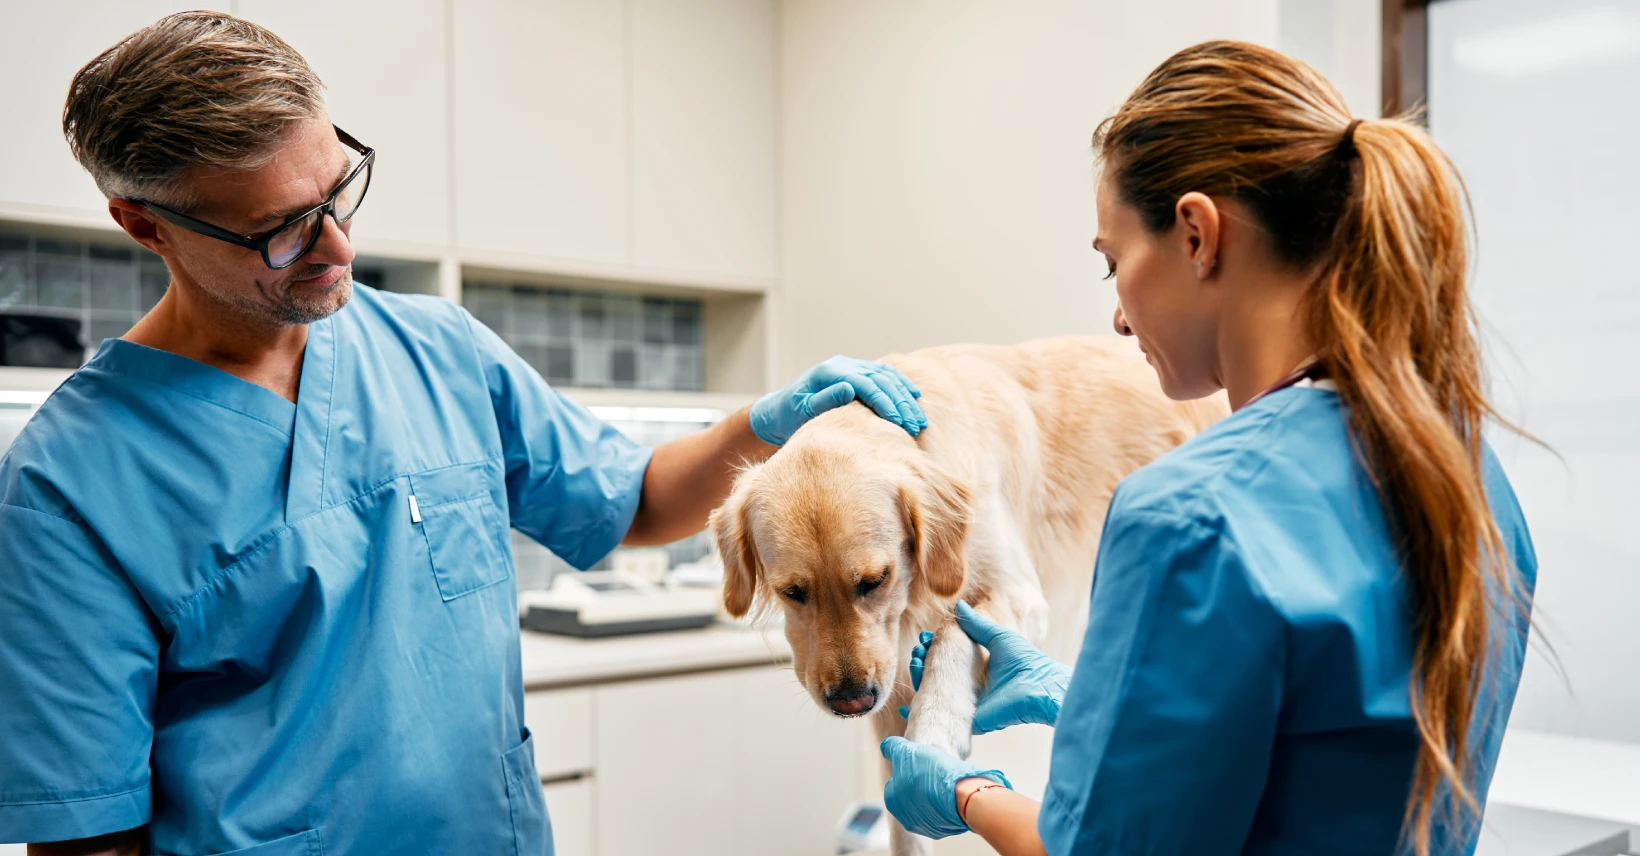 VET treating a dog with his assistant